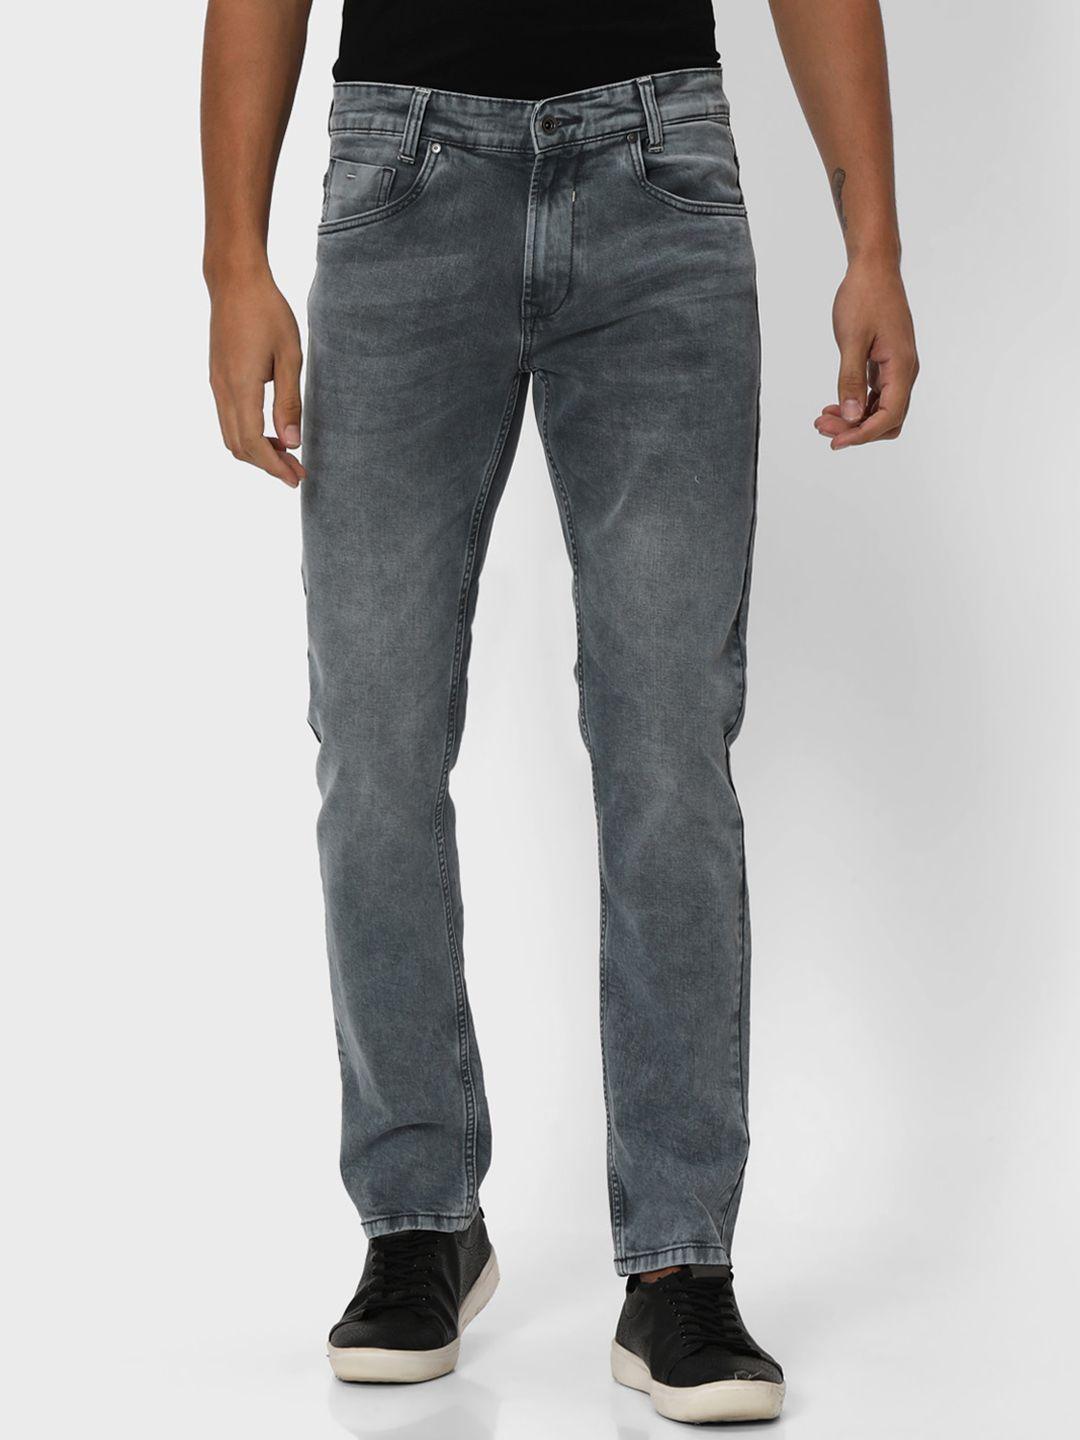 mufti-men-straight-fit-heavy-fade-stretchable-jeans